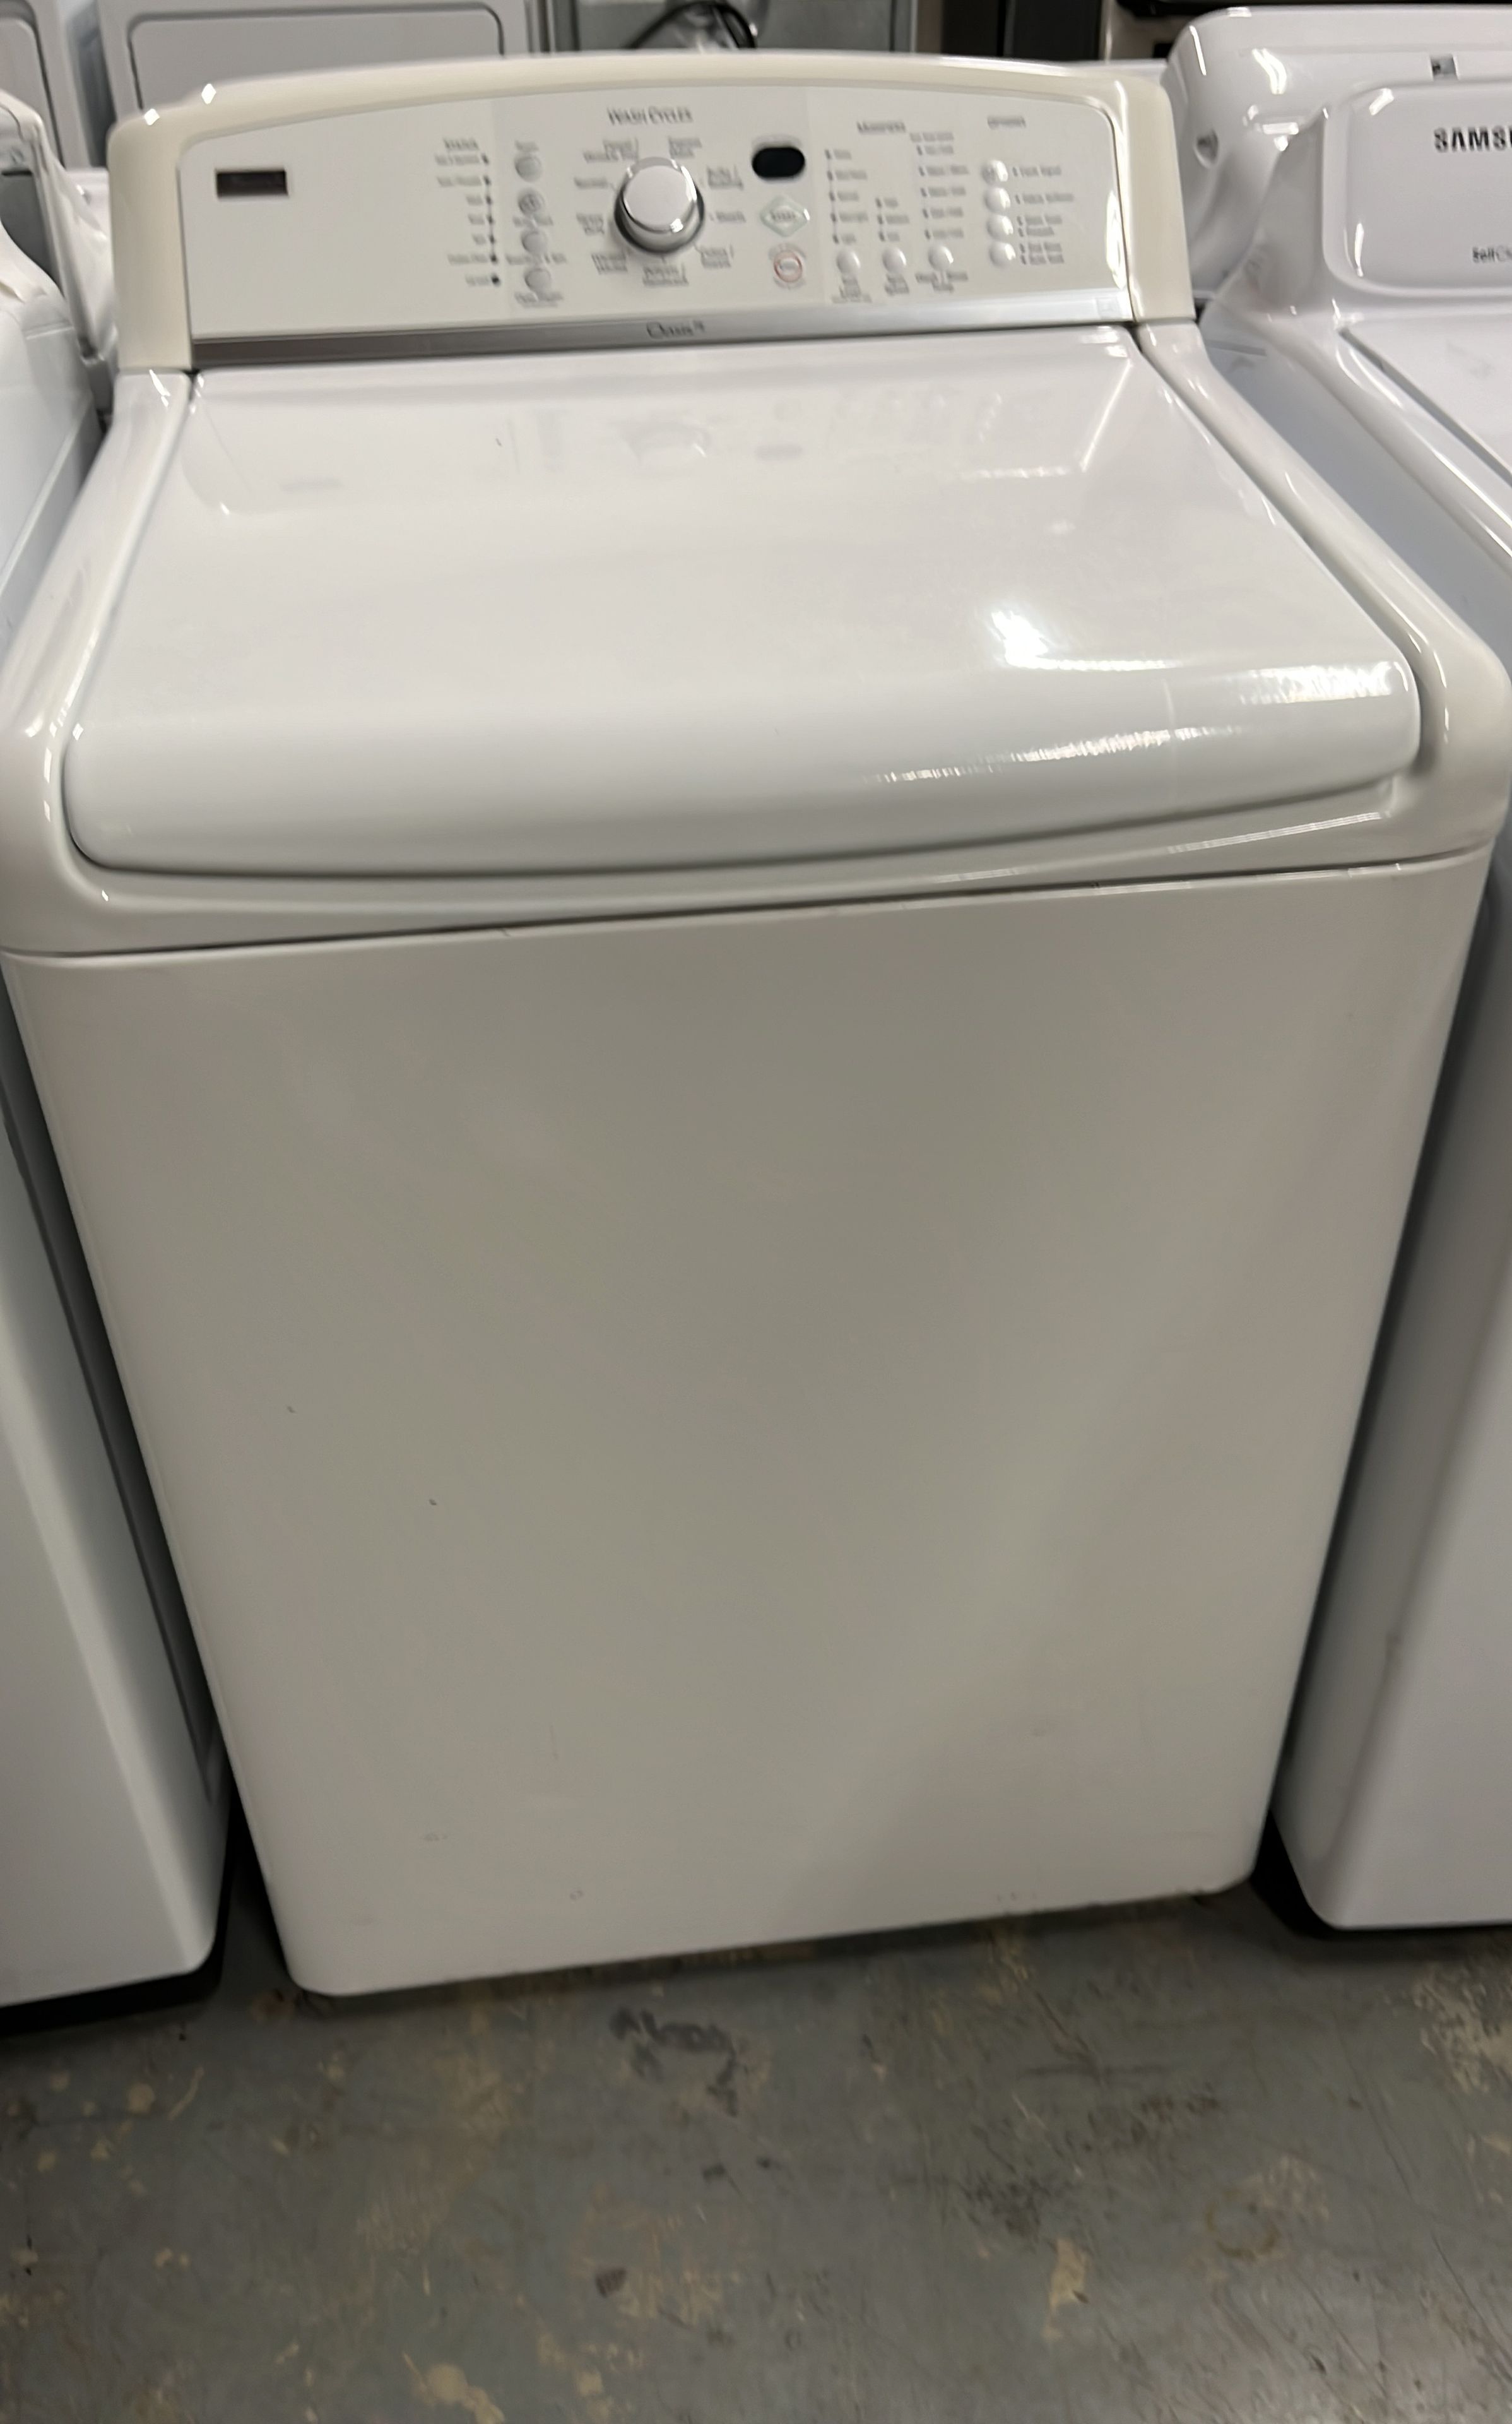 Kenmore Top Load Washing Machine Top Load Washer With agitator
